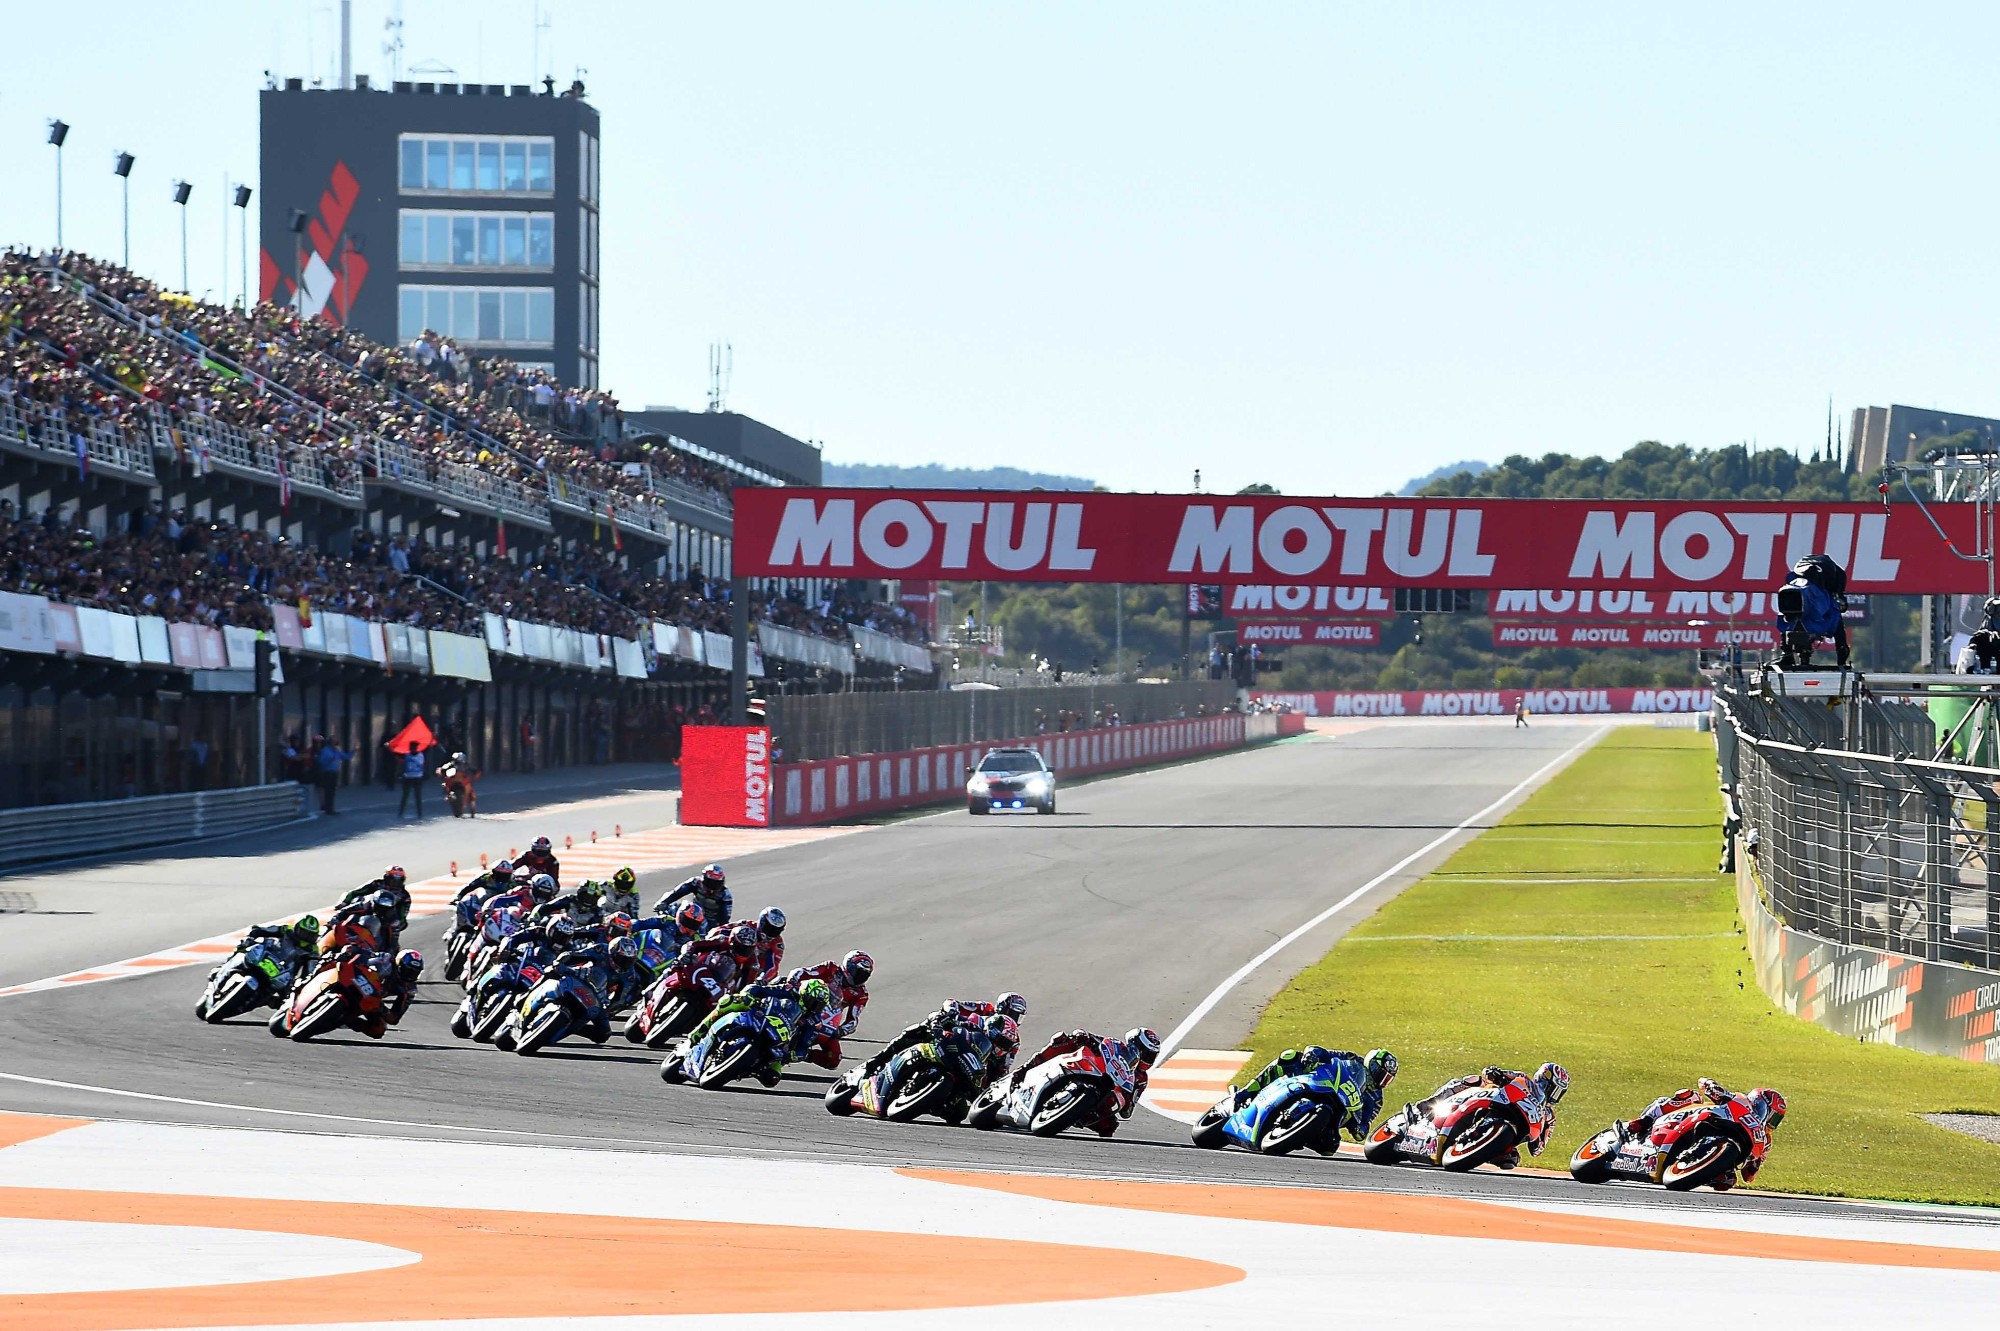 MotoGP beIN SPORTS Releases Broadcast Schedule For Grand Prix Of Valencia 